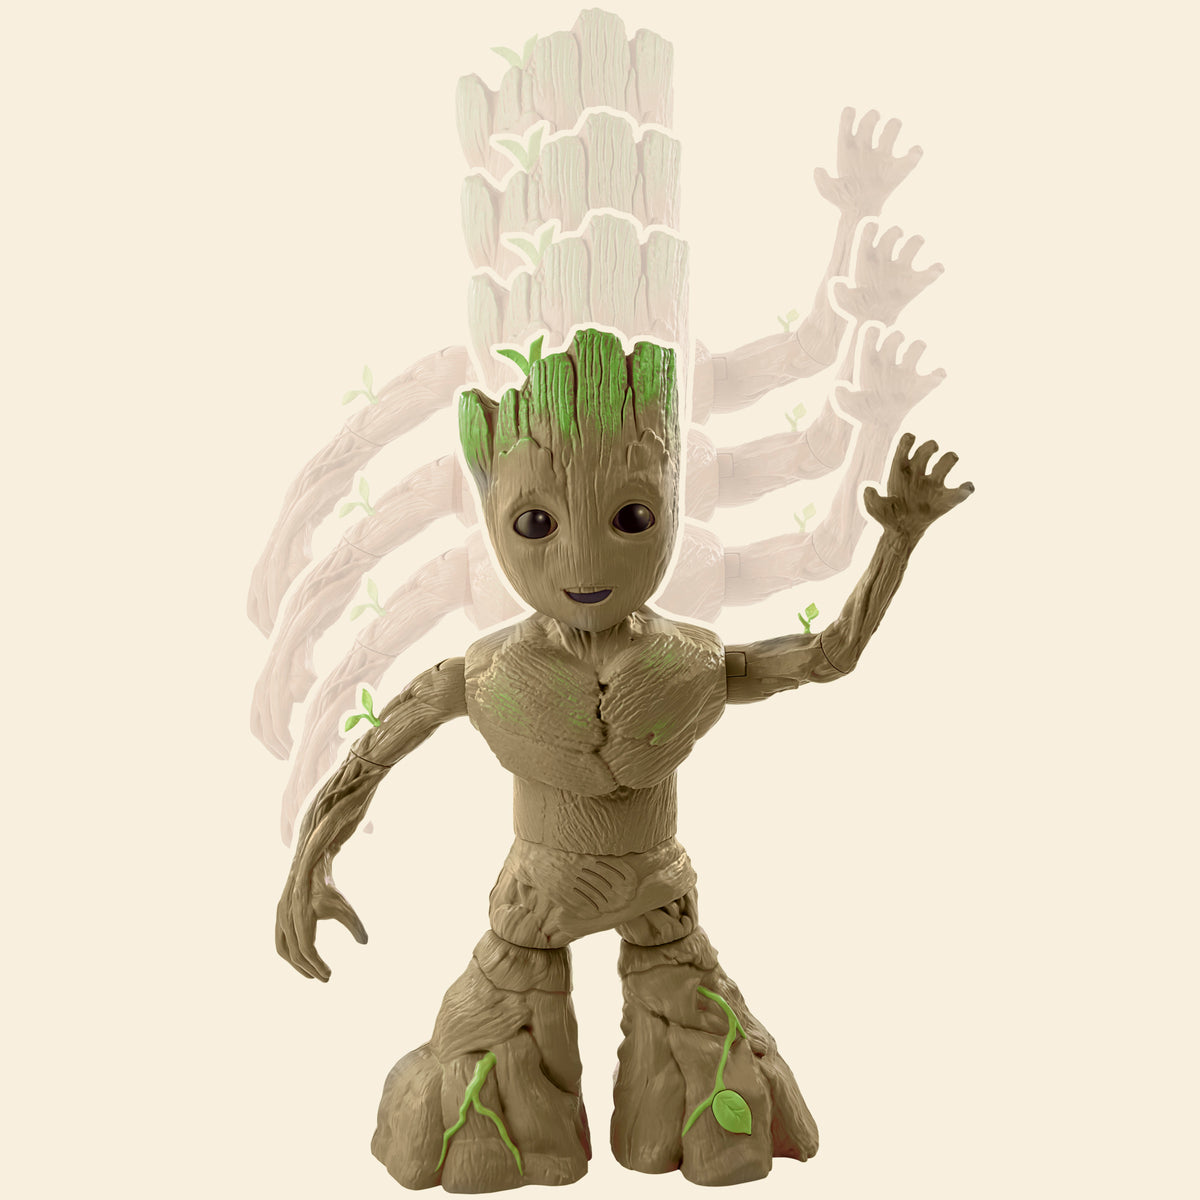 3 - Groove´n Groot - Interaktive Actionfigur, Guardians Of The Galaxy  Actionfigur